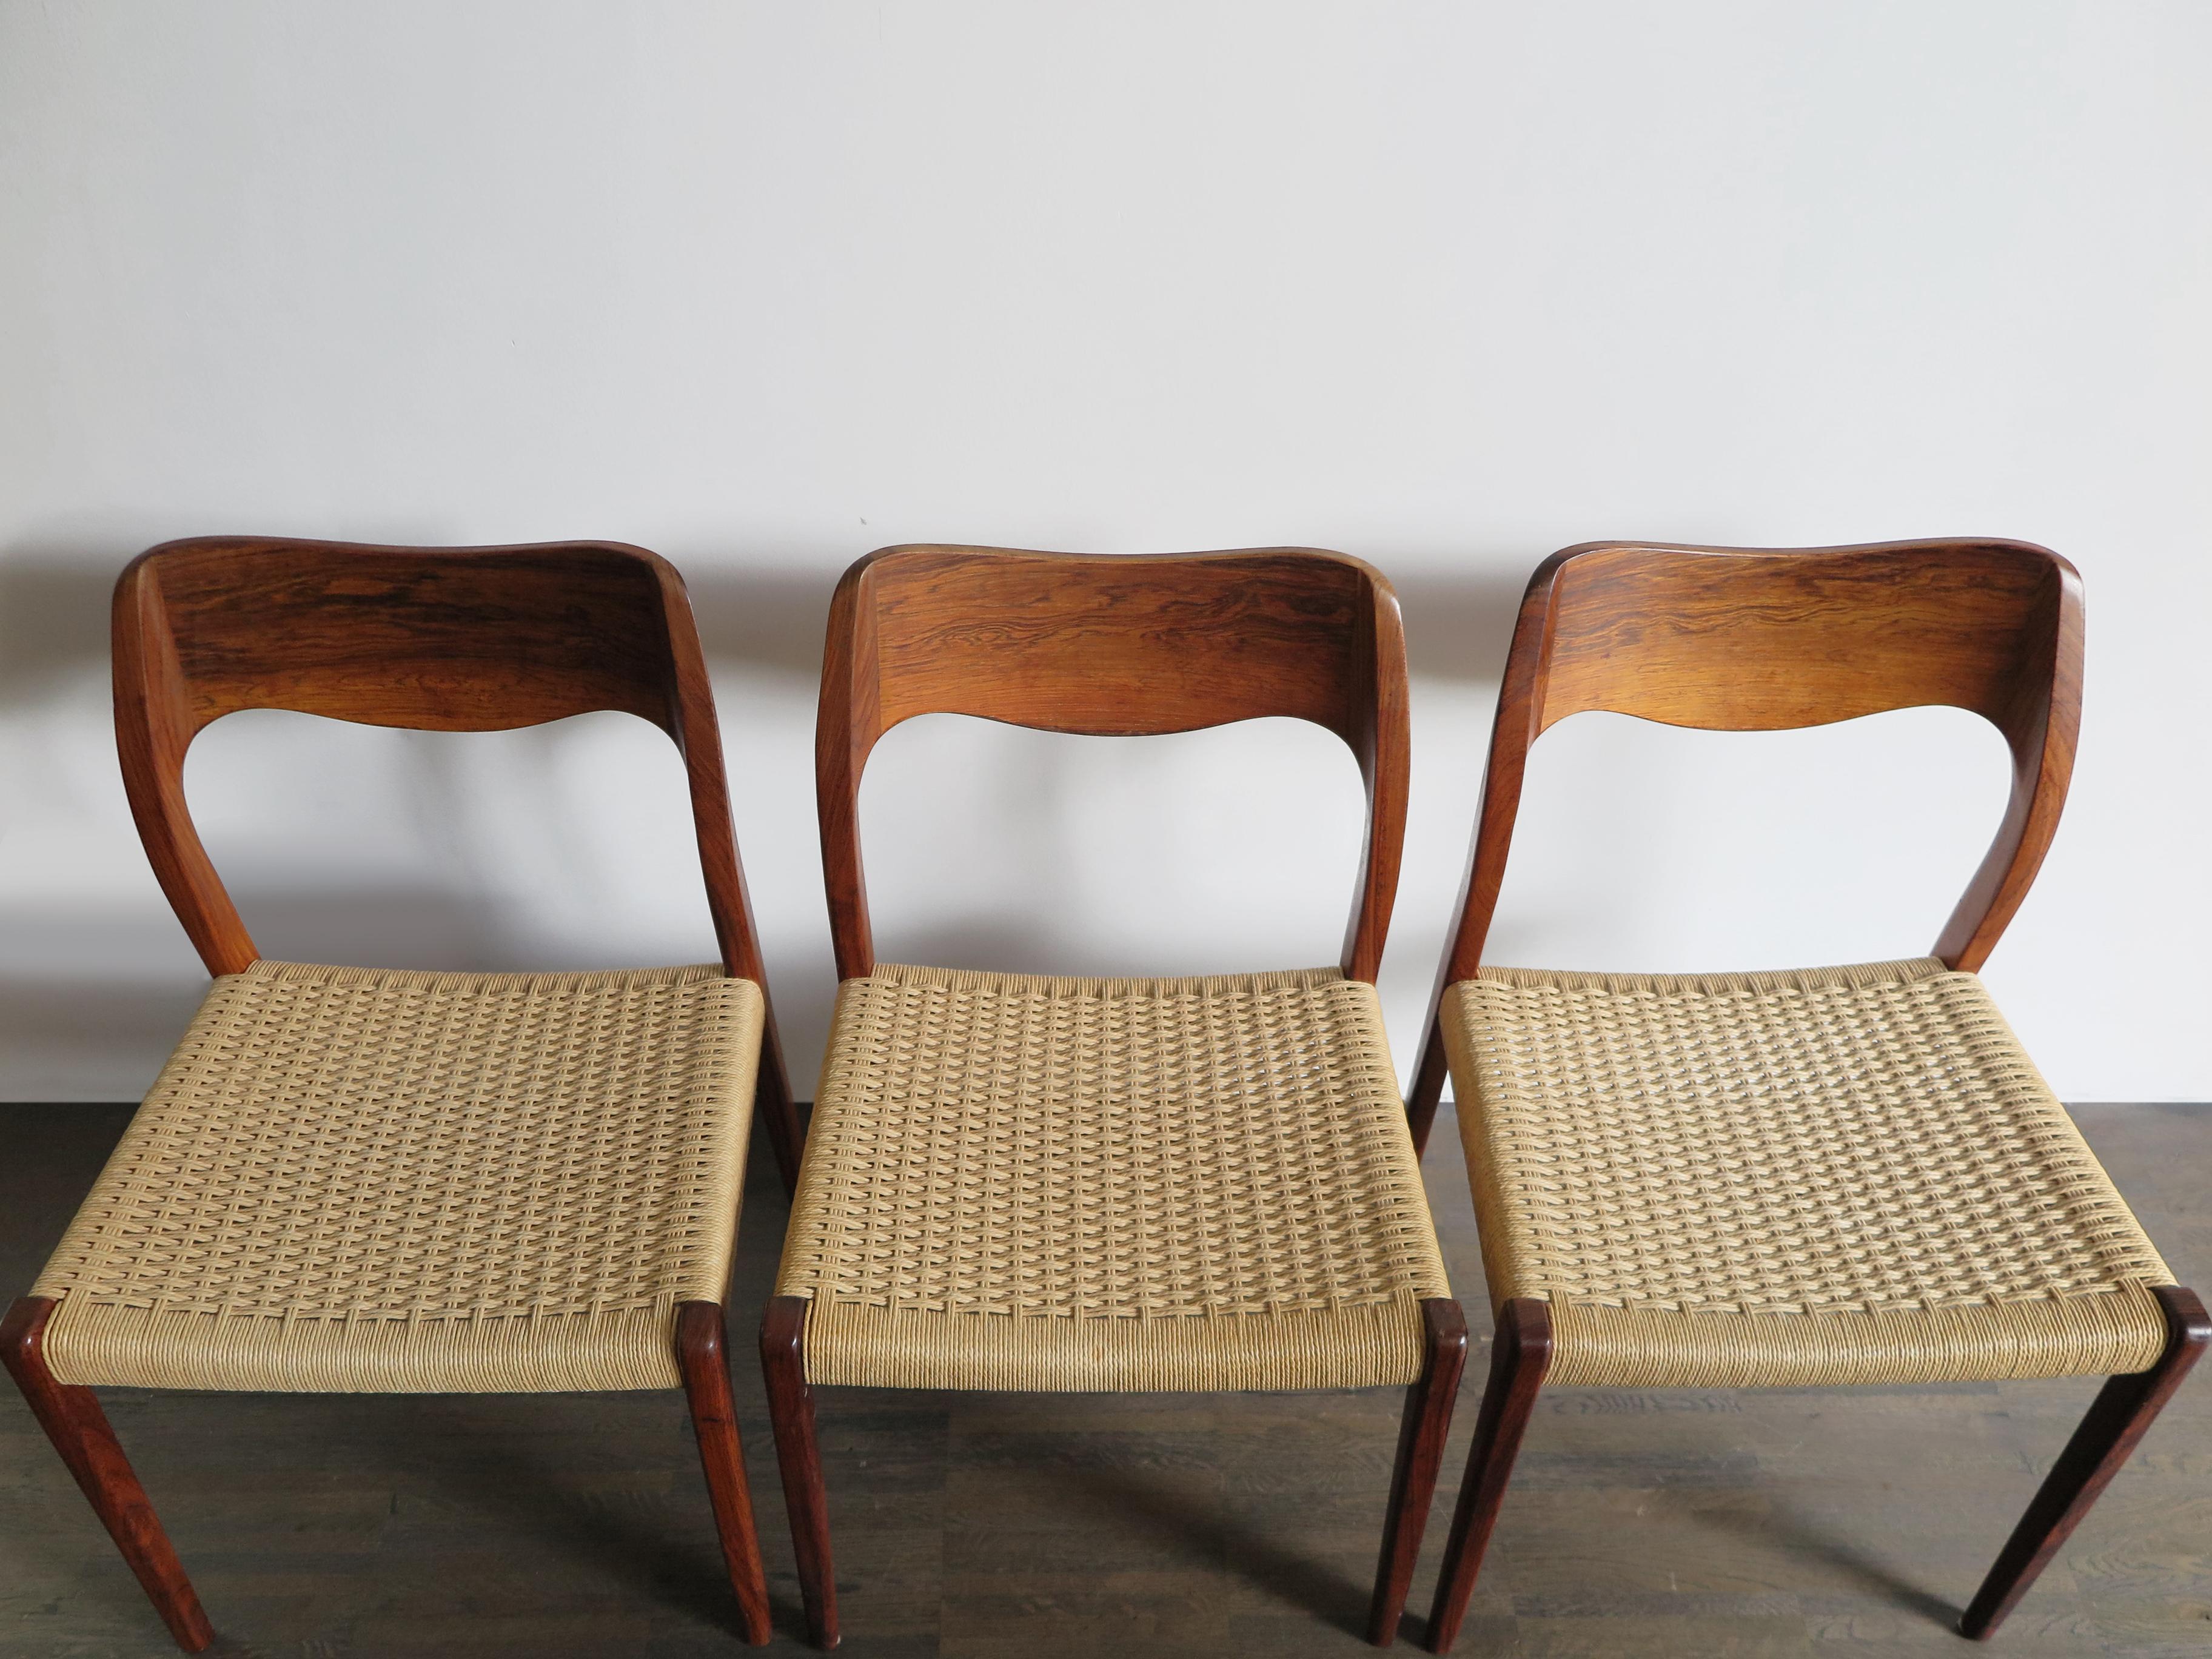 Danish Niels O. Møller Scandinavian Midcentury Dining Chairs 71 in Wood and Rope, 1960s